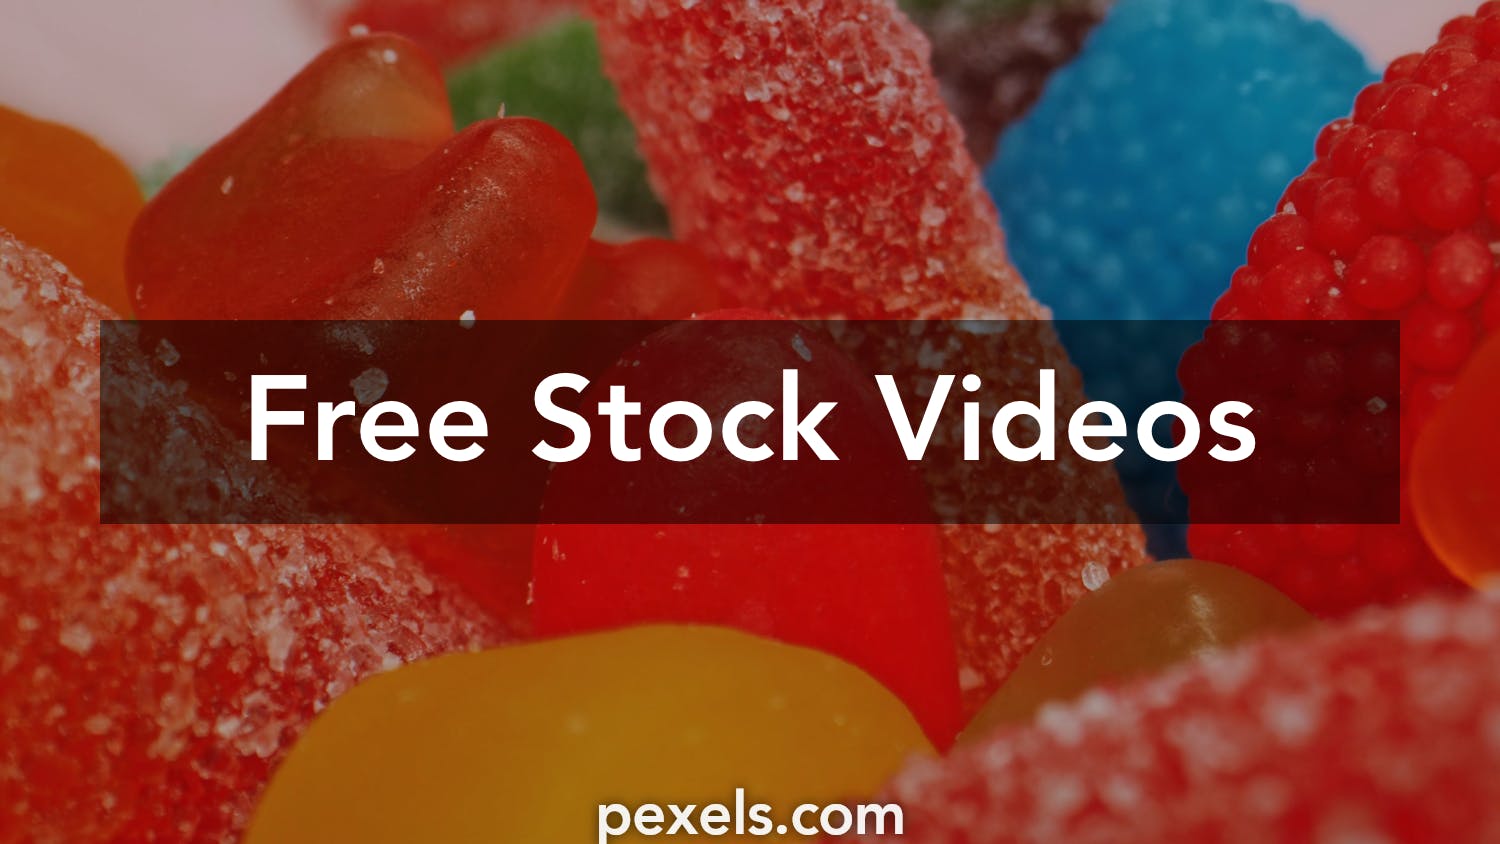 Gummy Bears Videos Download The Best Free 4k Stock Video Footage And Gummy Bears Hd Video Clips 